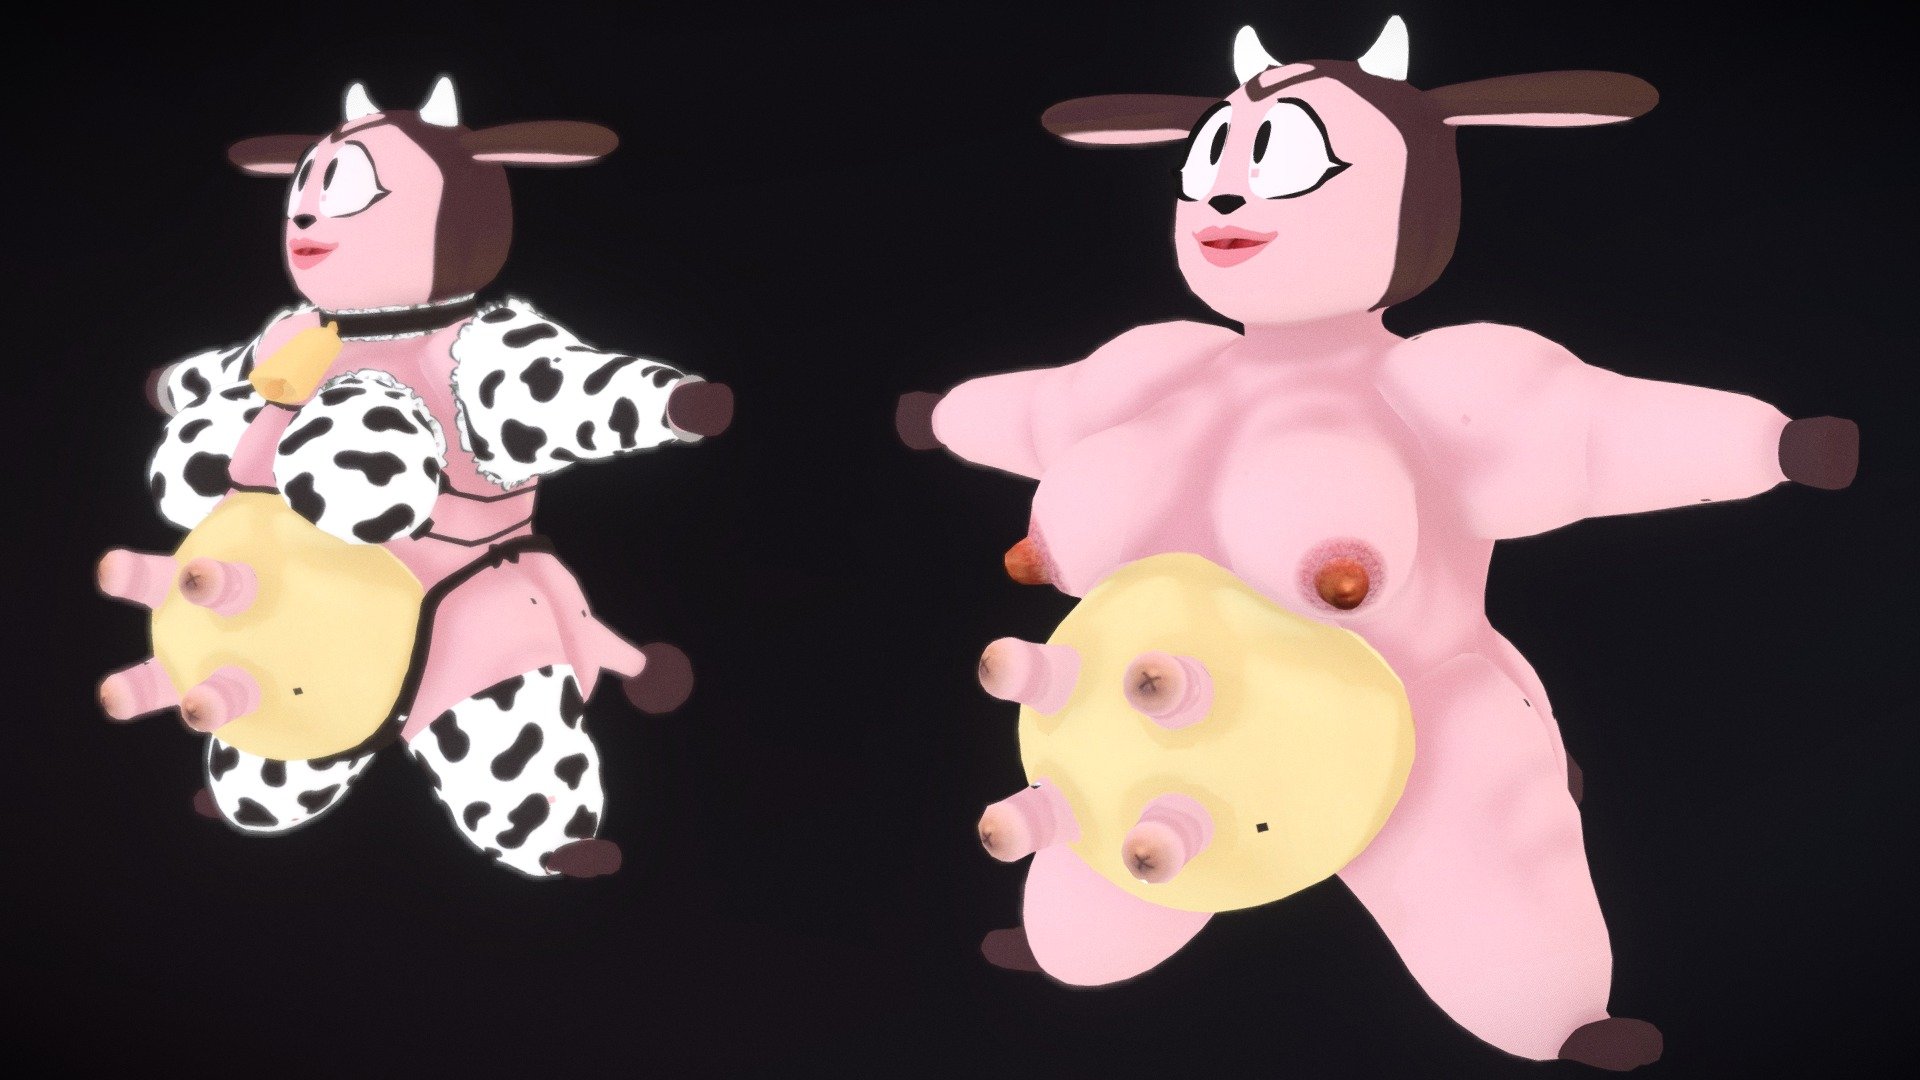 &lsquo;Fully Modeled' Miltank Milk Maid character model. 

FBX + Maya file included.
Base Colour + Roughness + Opacity main texture channels included 3d model